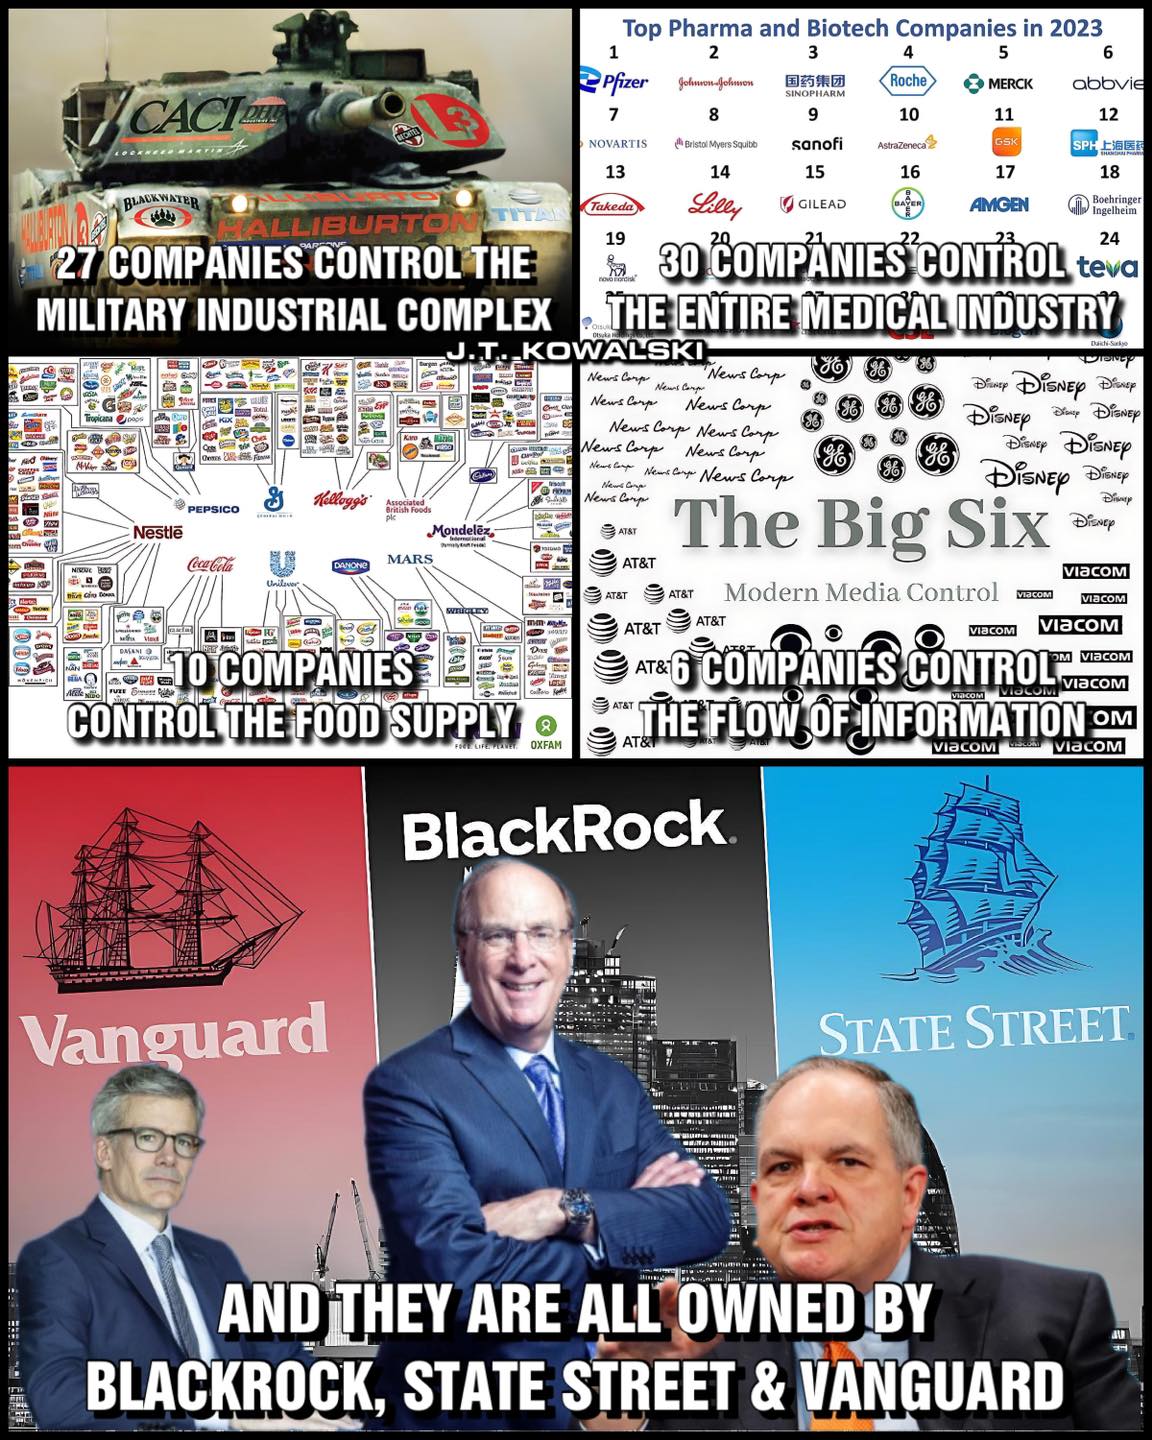 Corporate cartels are owned by Vanguard, Black Rock, and State Street